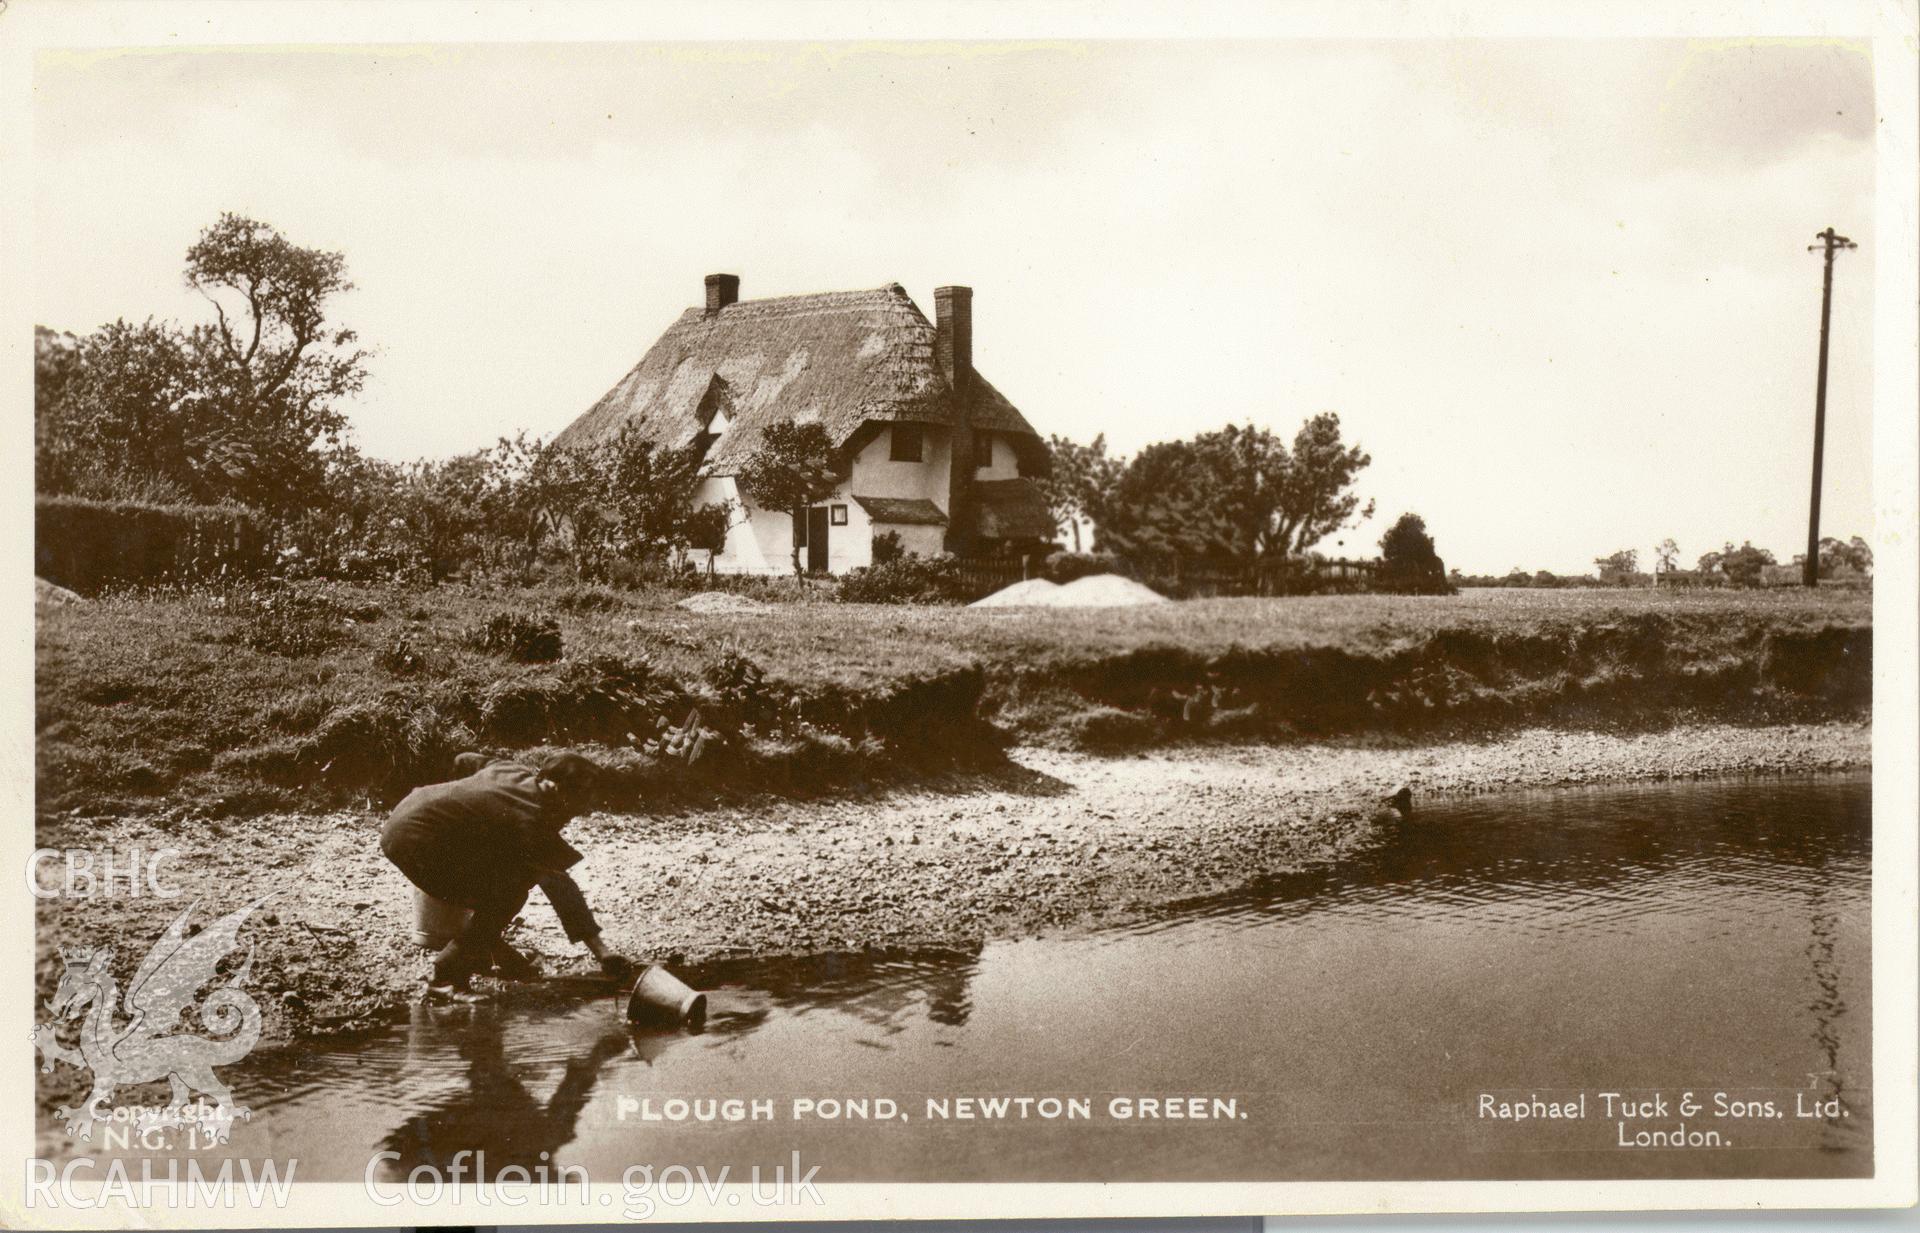 Digitised postcard image of Plough Pond, Newton Green, with figure collecting water, Raphael Tuck and Sons Ltd. Produced by Parks and Gardens Data Services, from an original item in the Peter Davis Collection at Parks and Gardens UK. We hold only web-resolution images of this collection, suitable for viewing on screen and for research purposes only. We do not hold the original images, or publication quality scans.